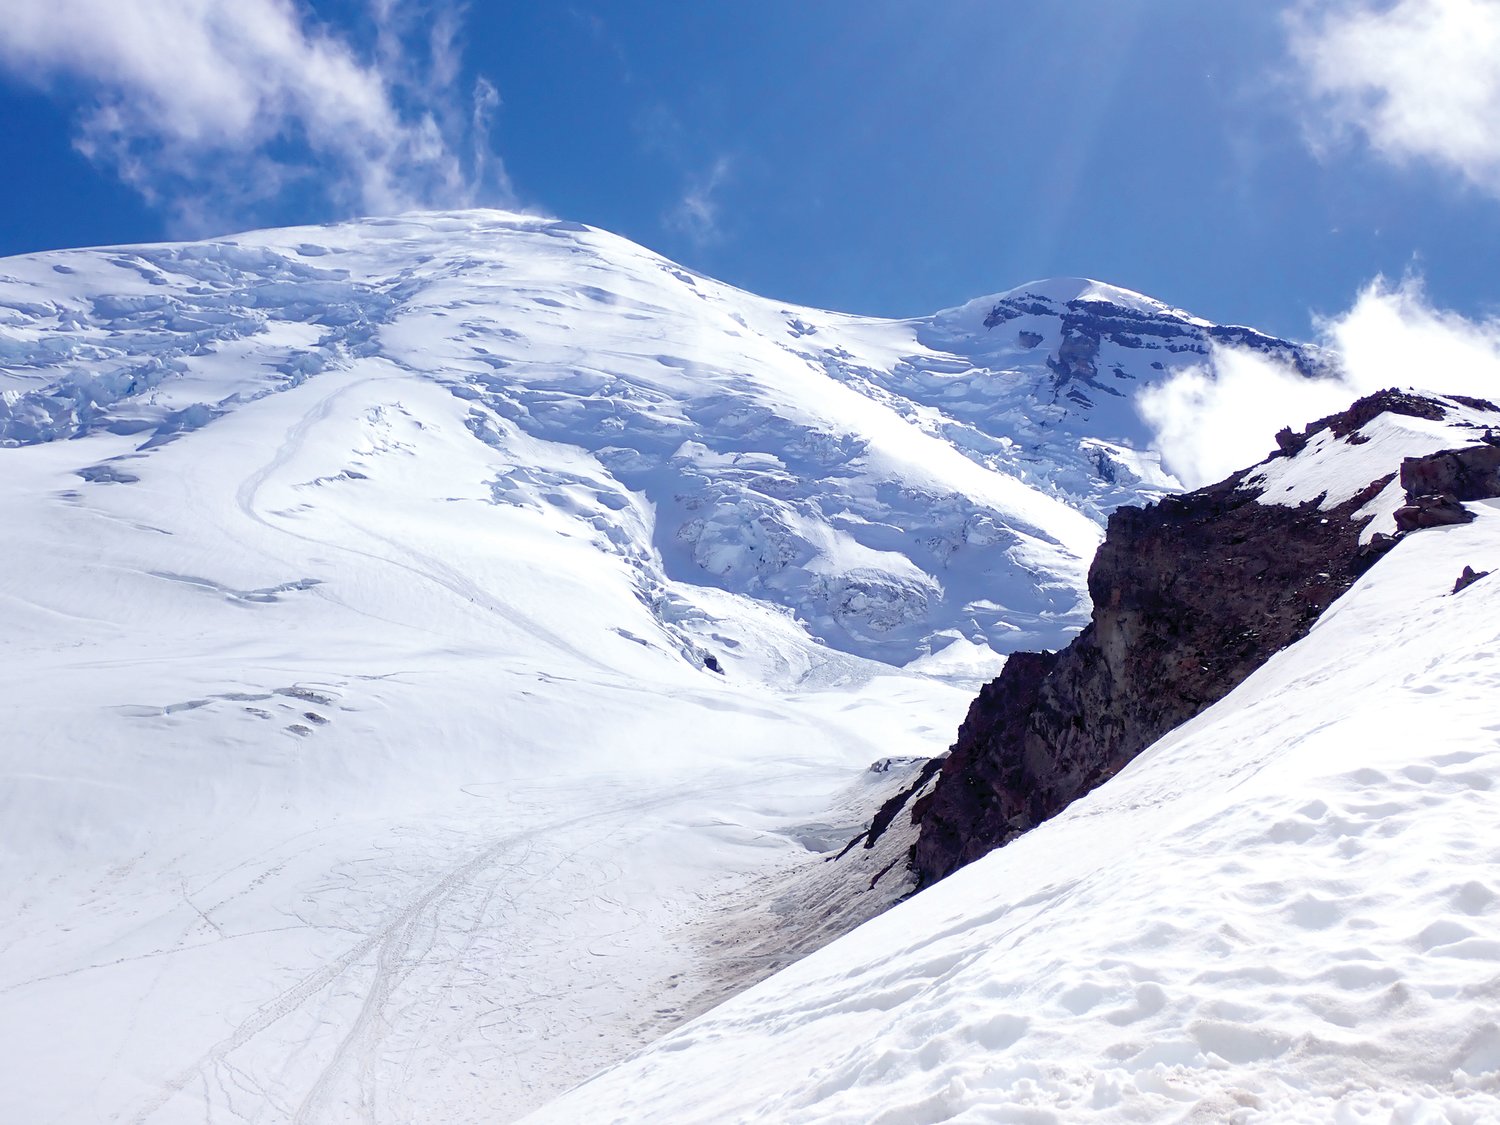 Rocks, clouds and snow surround the summit of Mount Rainier.